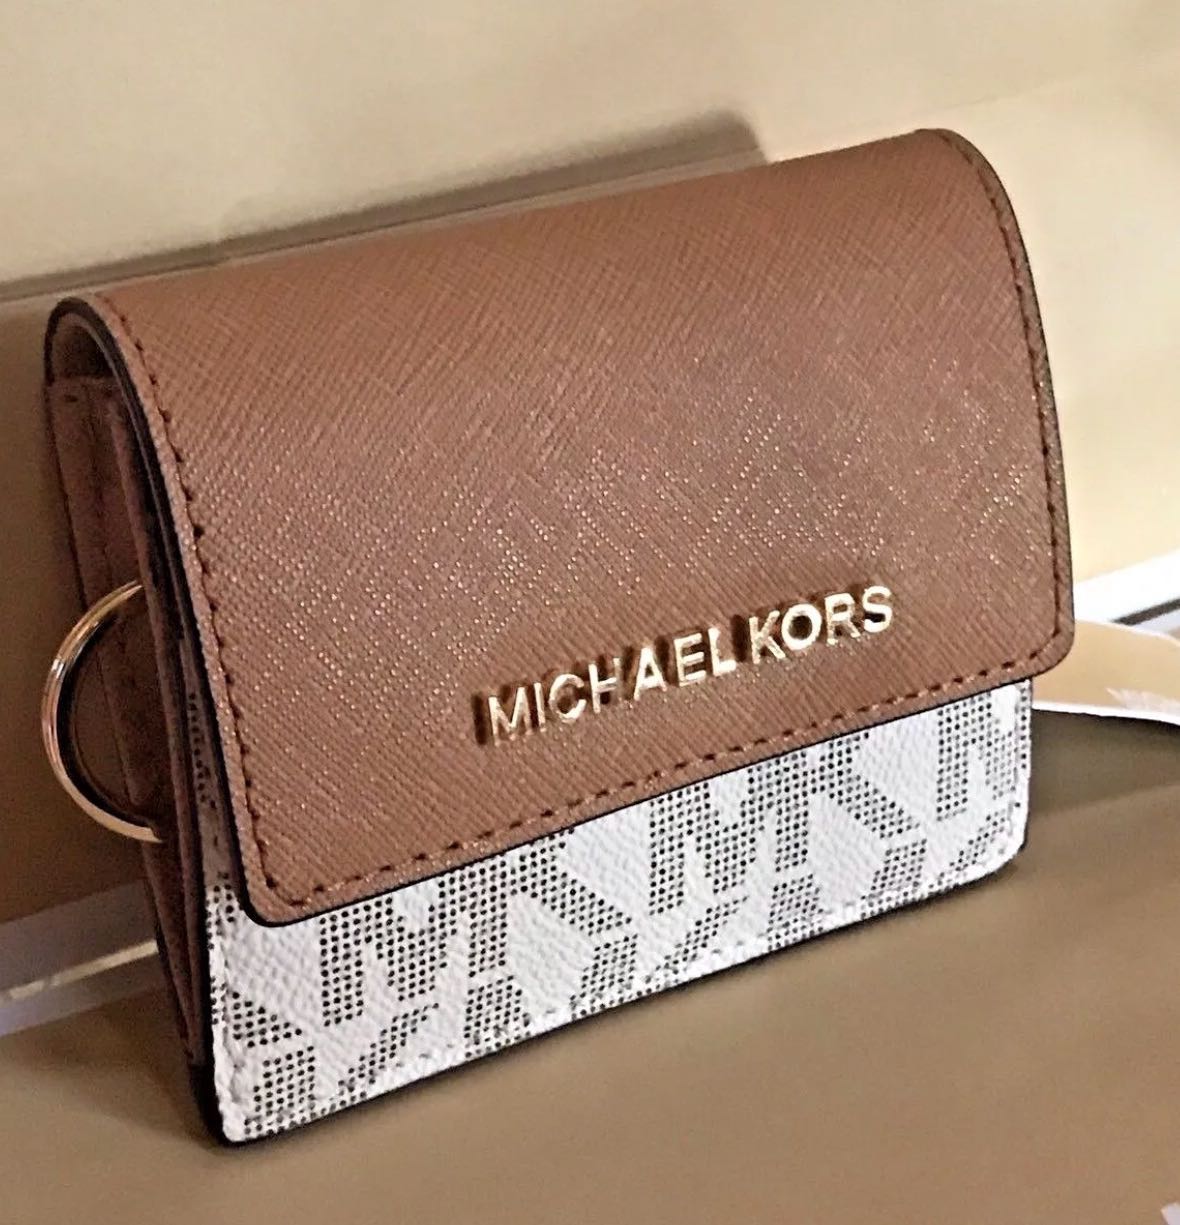 michael kors wallet with card holder